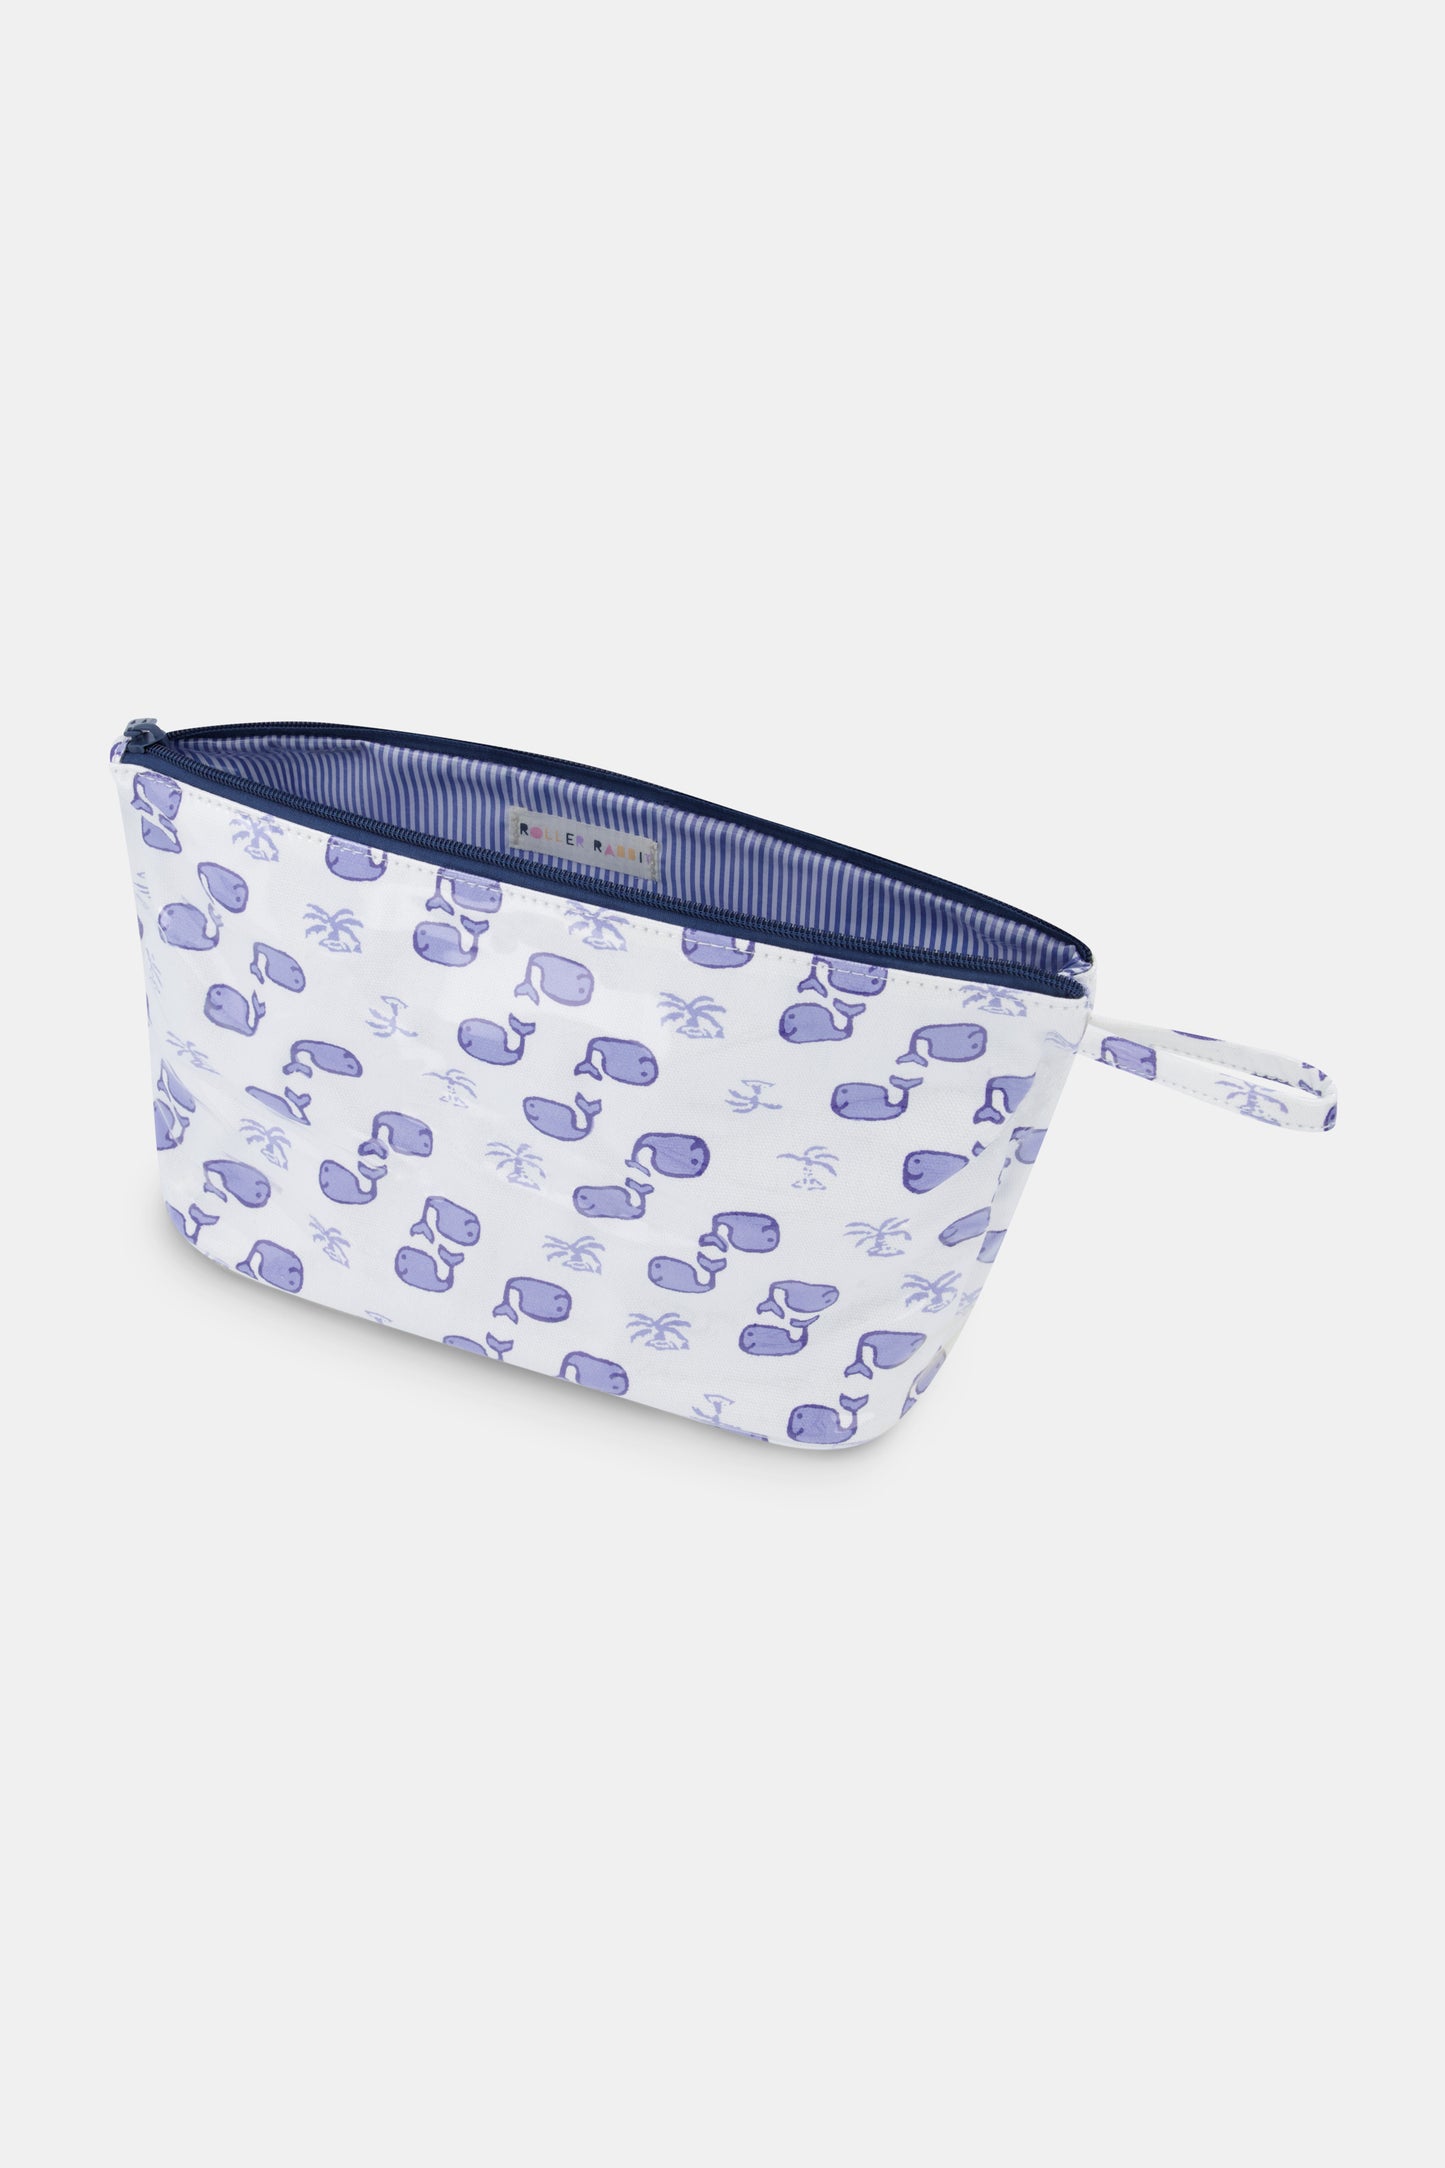 Roller-Rabbit-Moby-Toiletry-Case